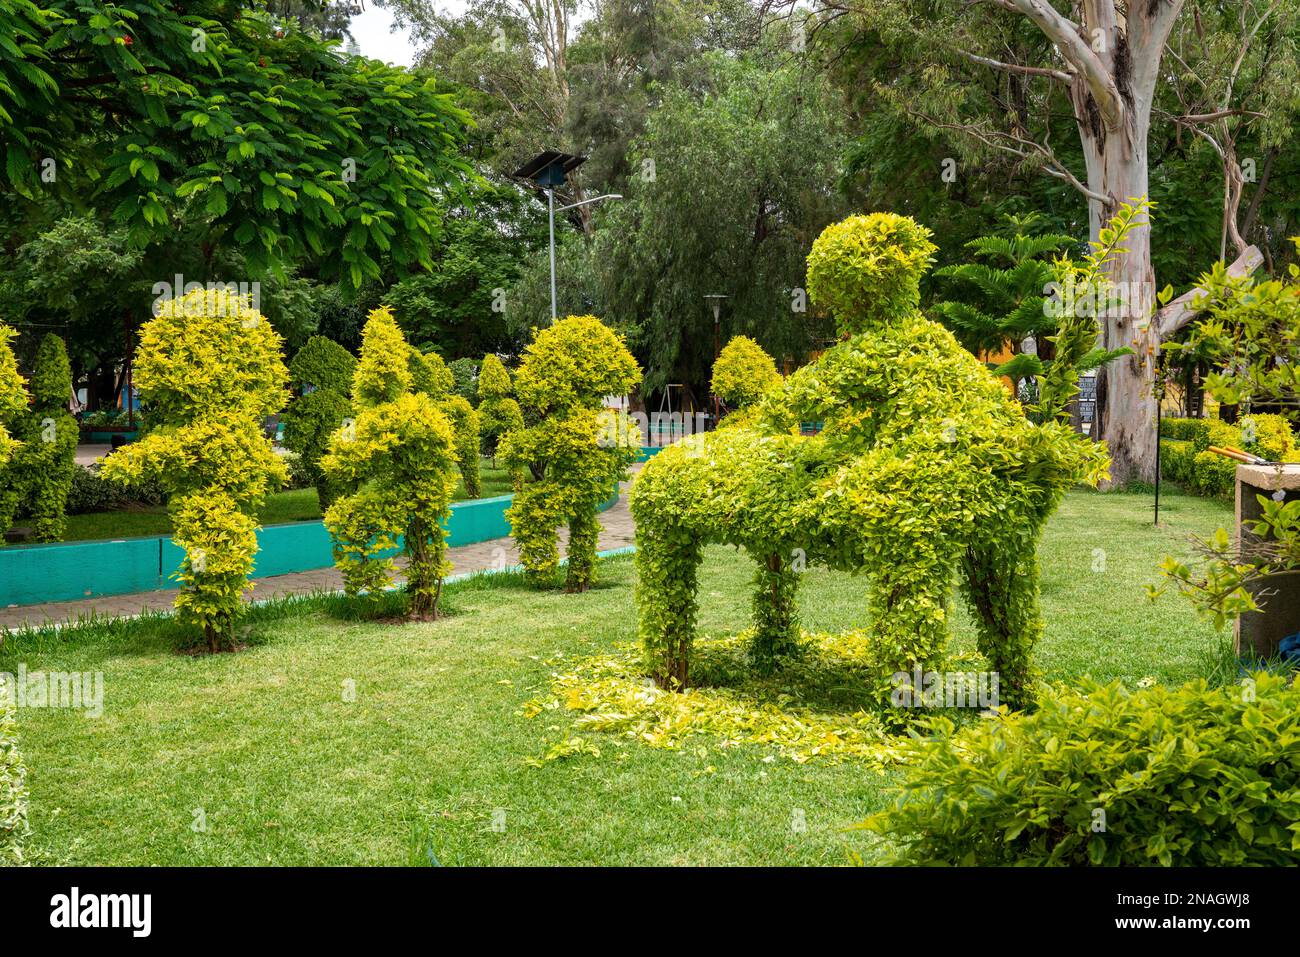 Shrubs trimmed into the shape of people & animals as a topiary in a park in San Bartolo Coyotepec, Oaxaca, Mexico. Stock Photo